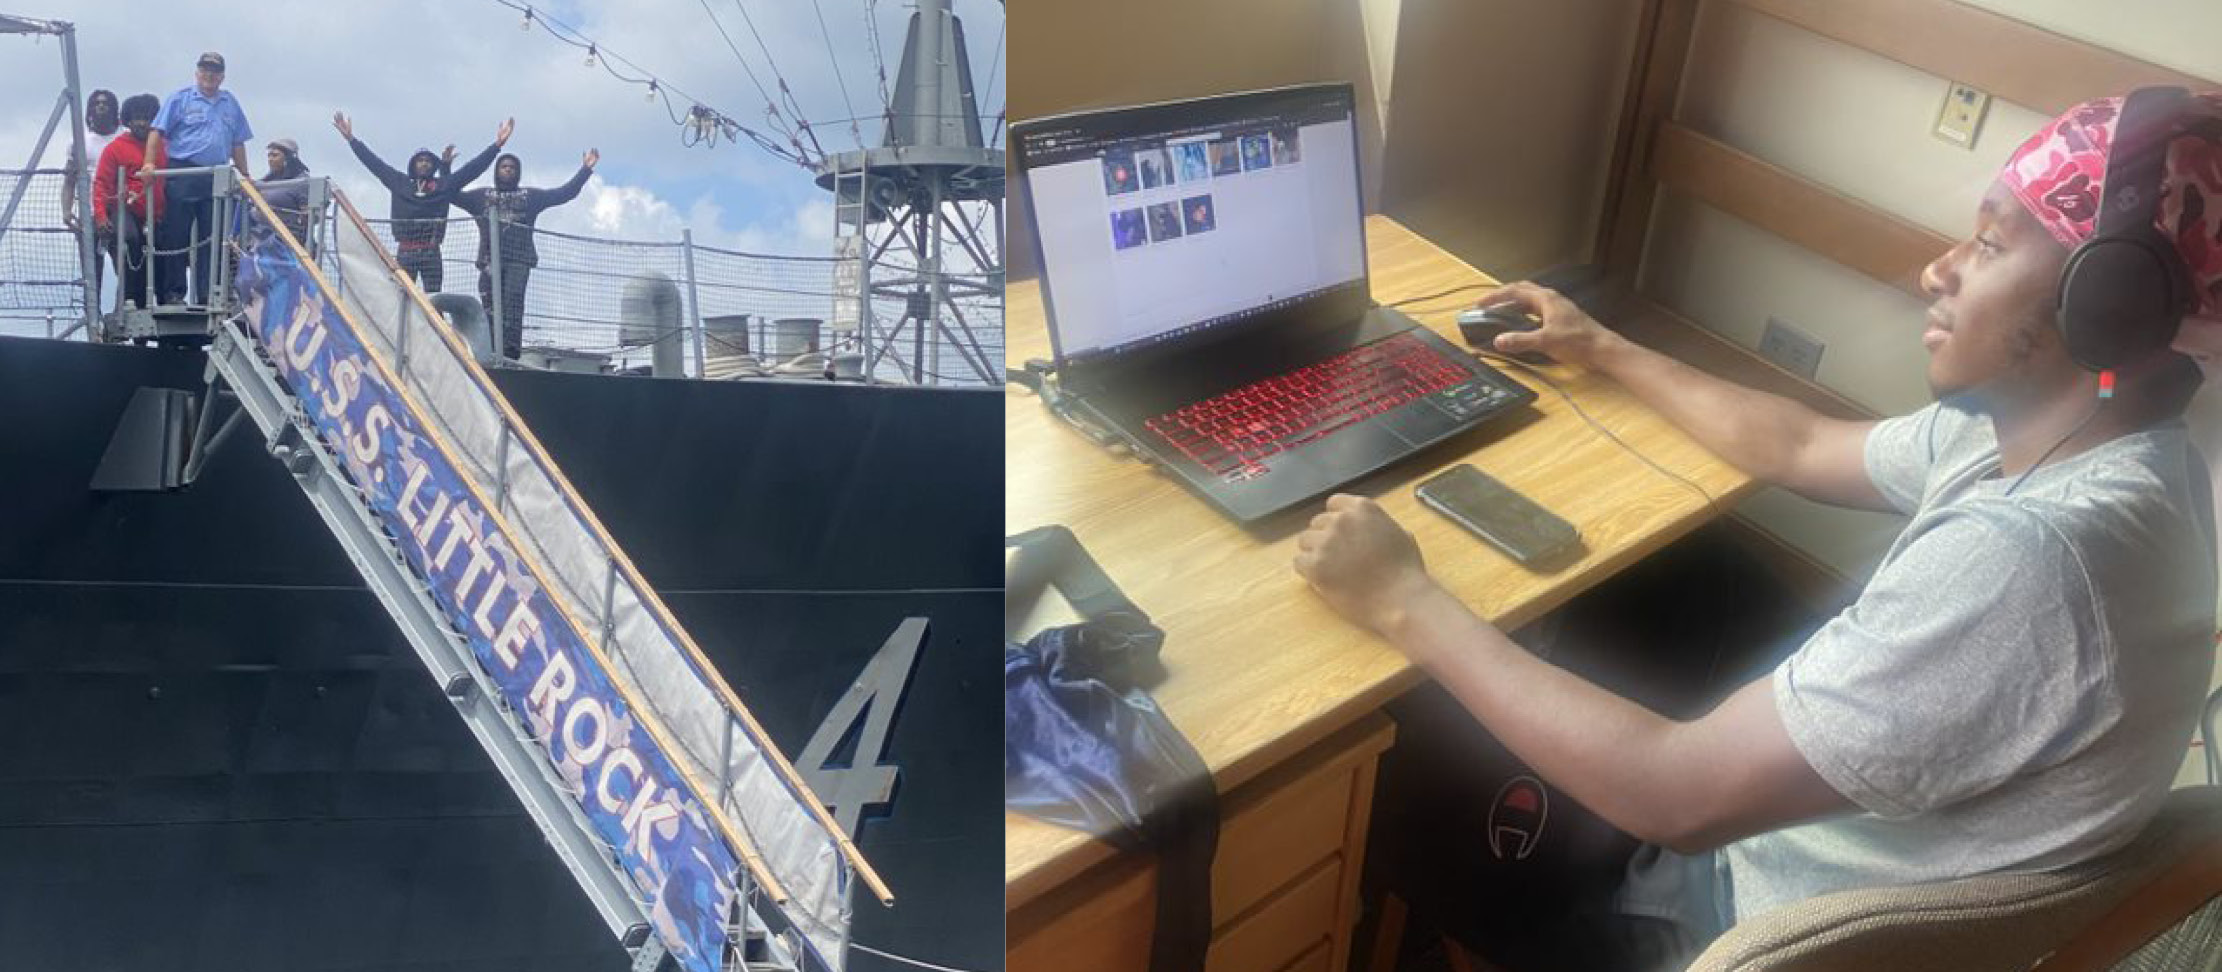 Left- students on ship right- student sitting at desk in dorm room